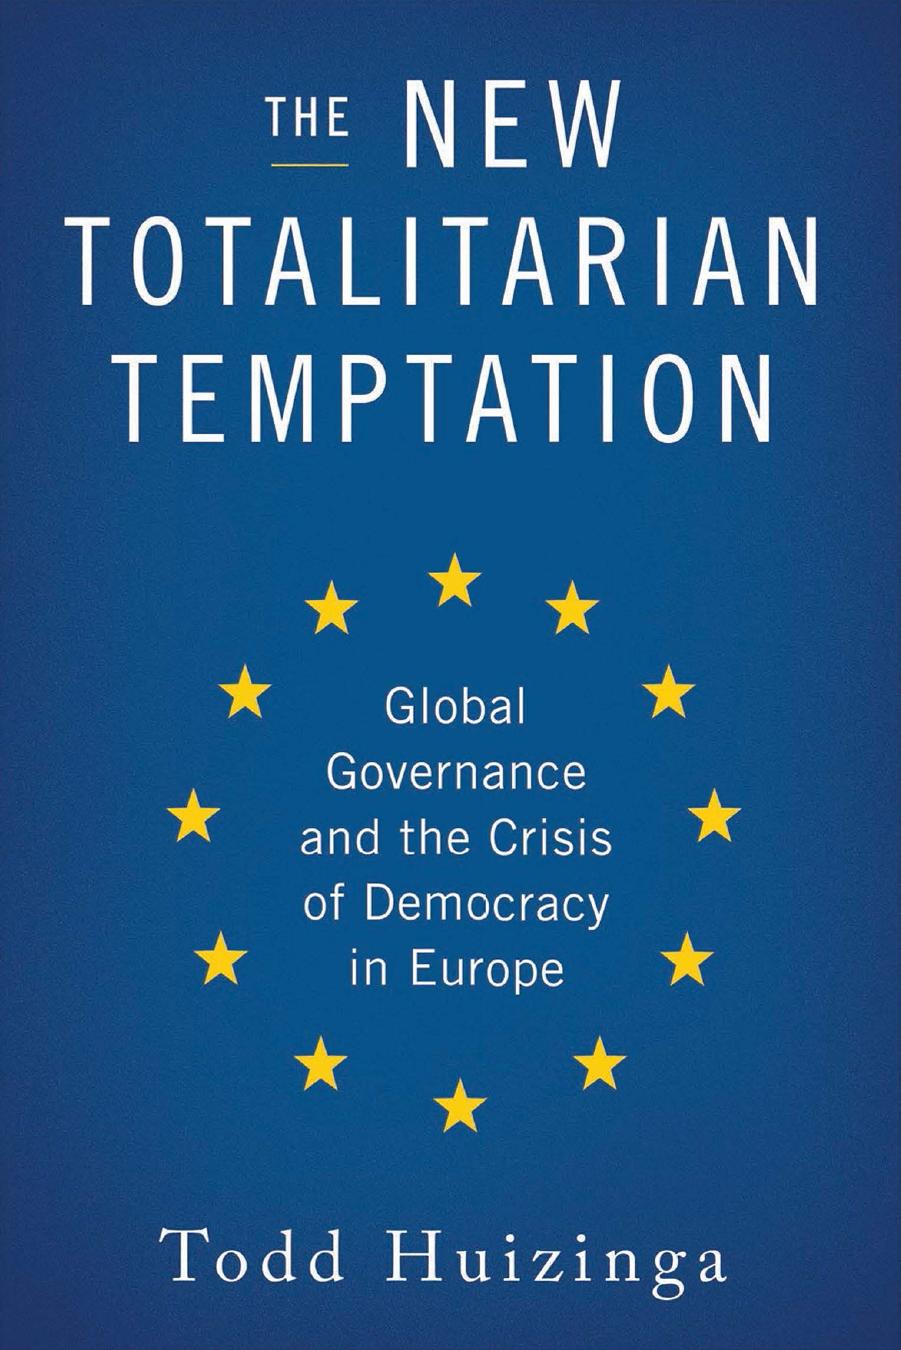 The New Totalitarian Temptation: Global Governance and the Crisis of Democracy in Europe by Todd Huizinga